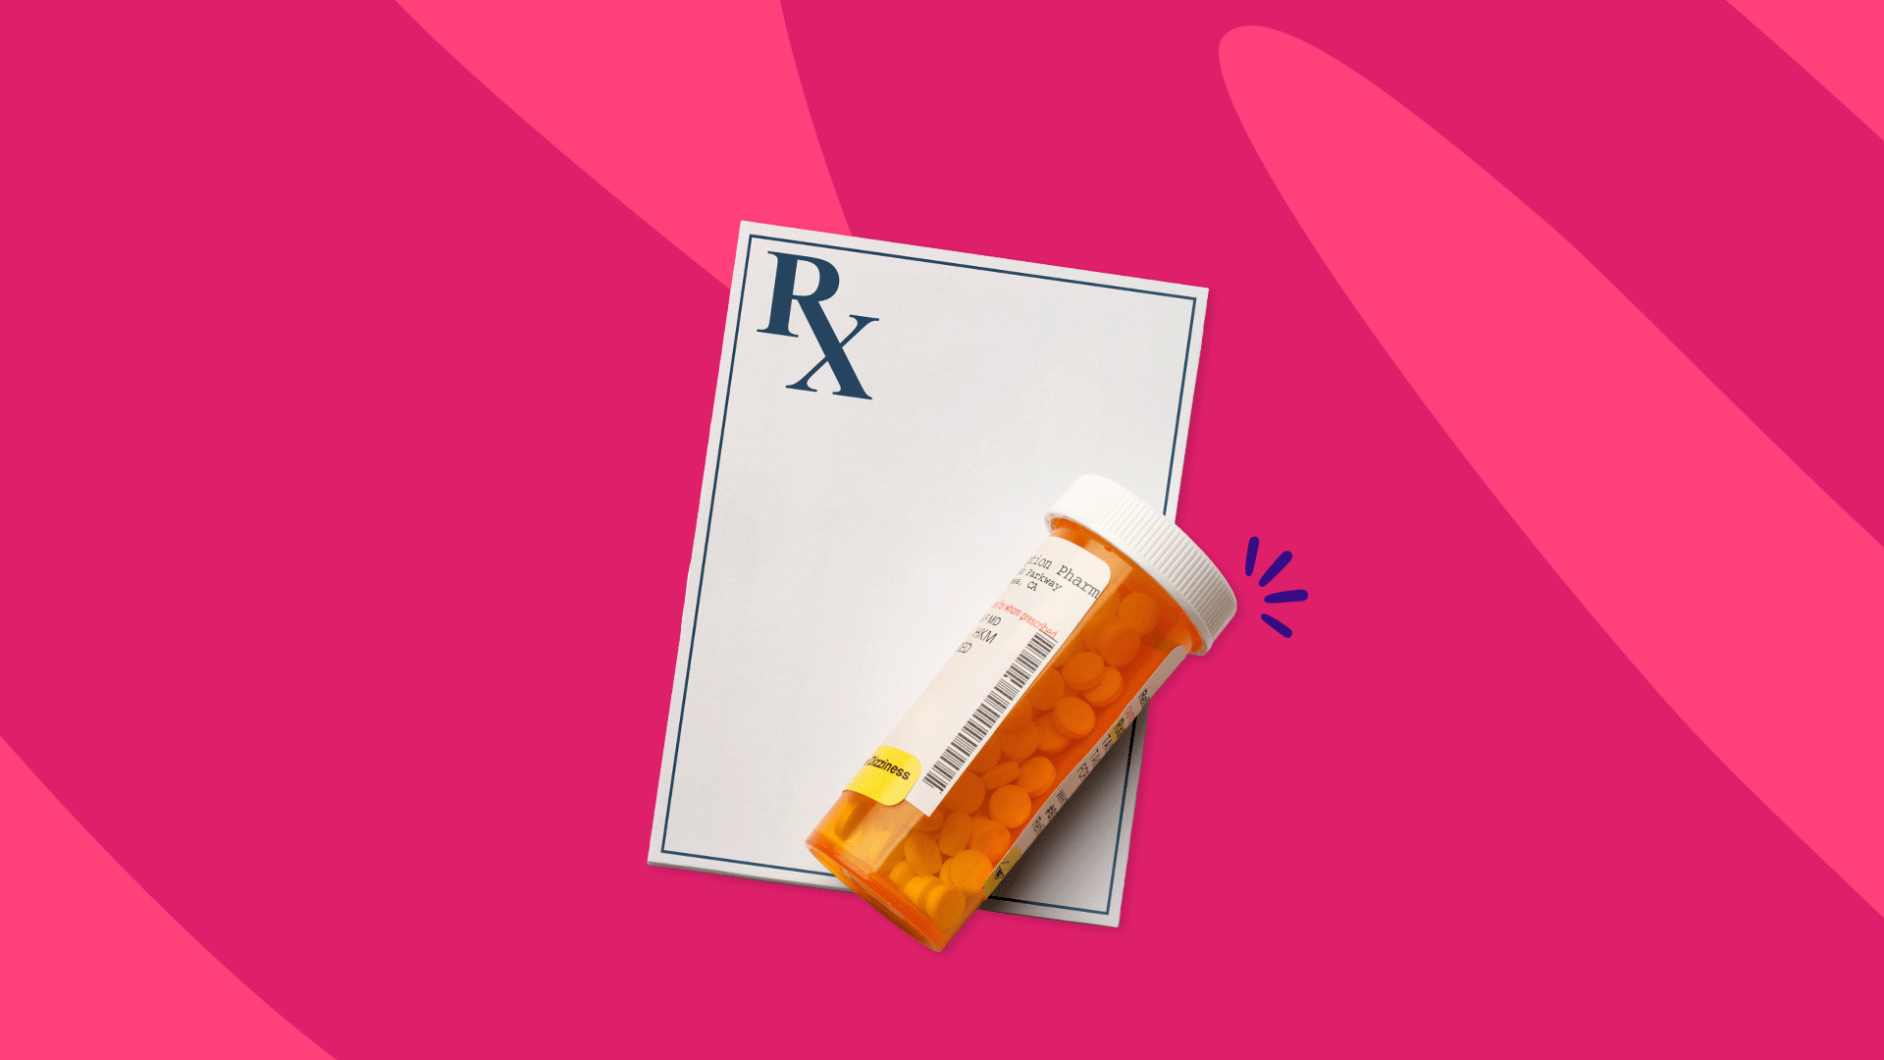 Rx pill bottle and prescription pad: Wellbutrin for anxiety